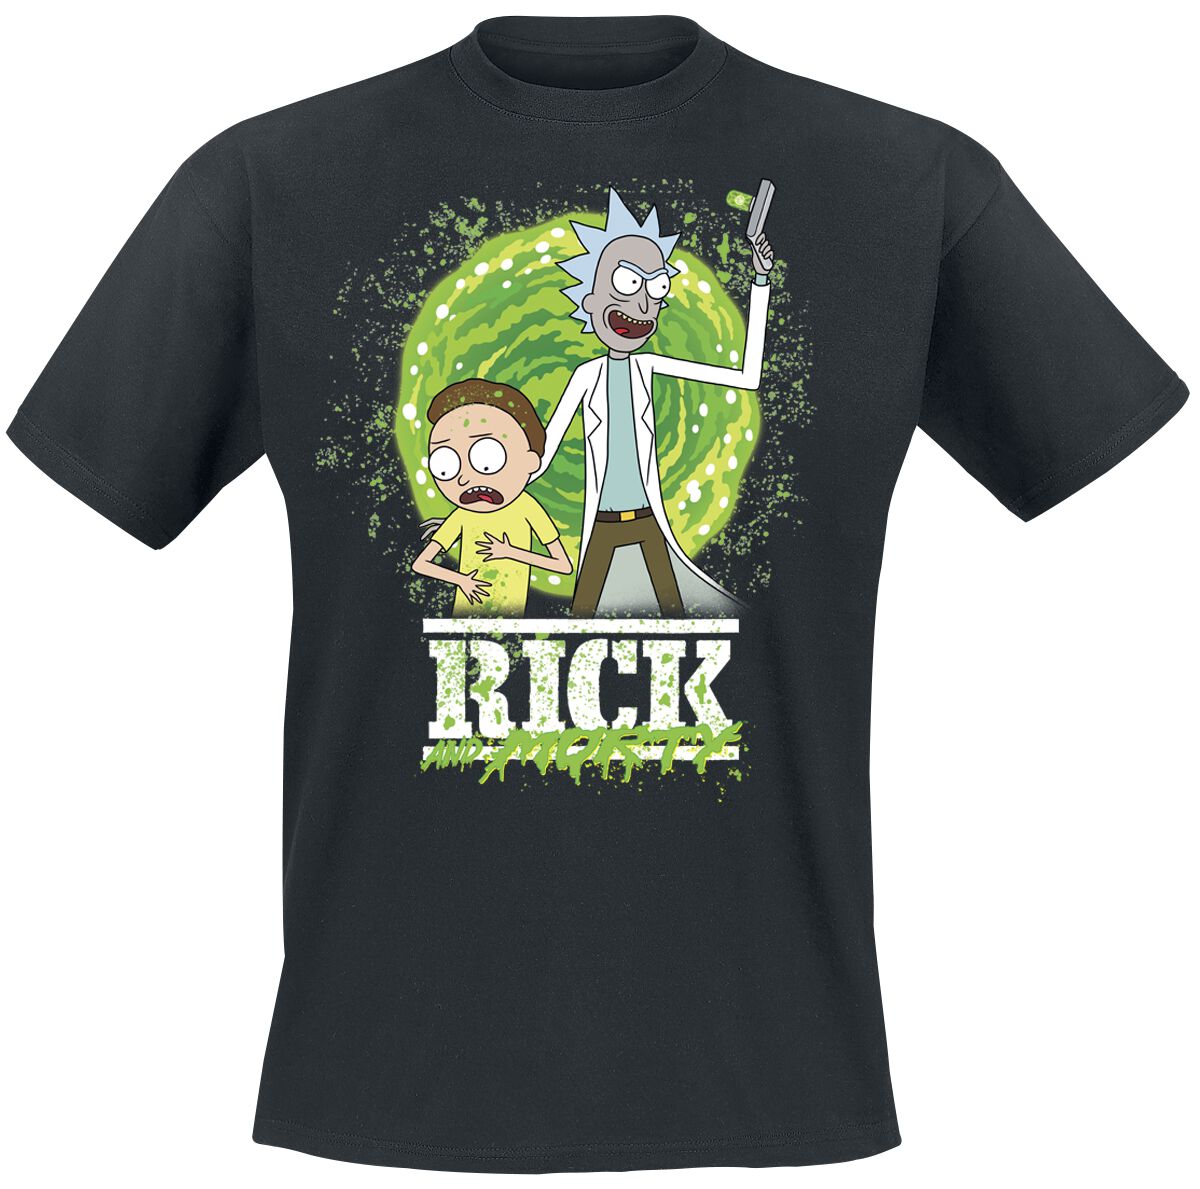 Rick And Morty Season 6 T-Shirt schwarz in S